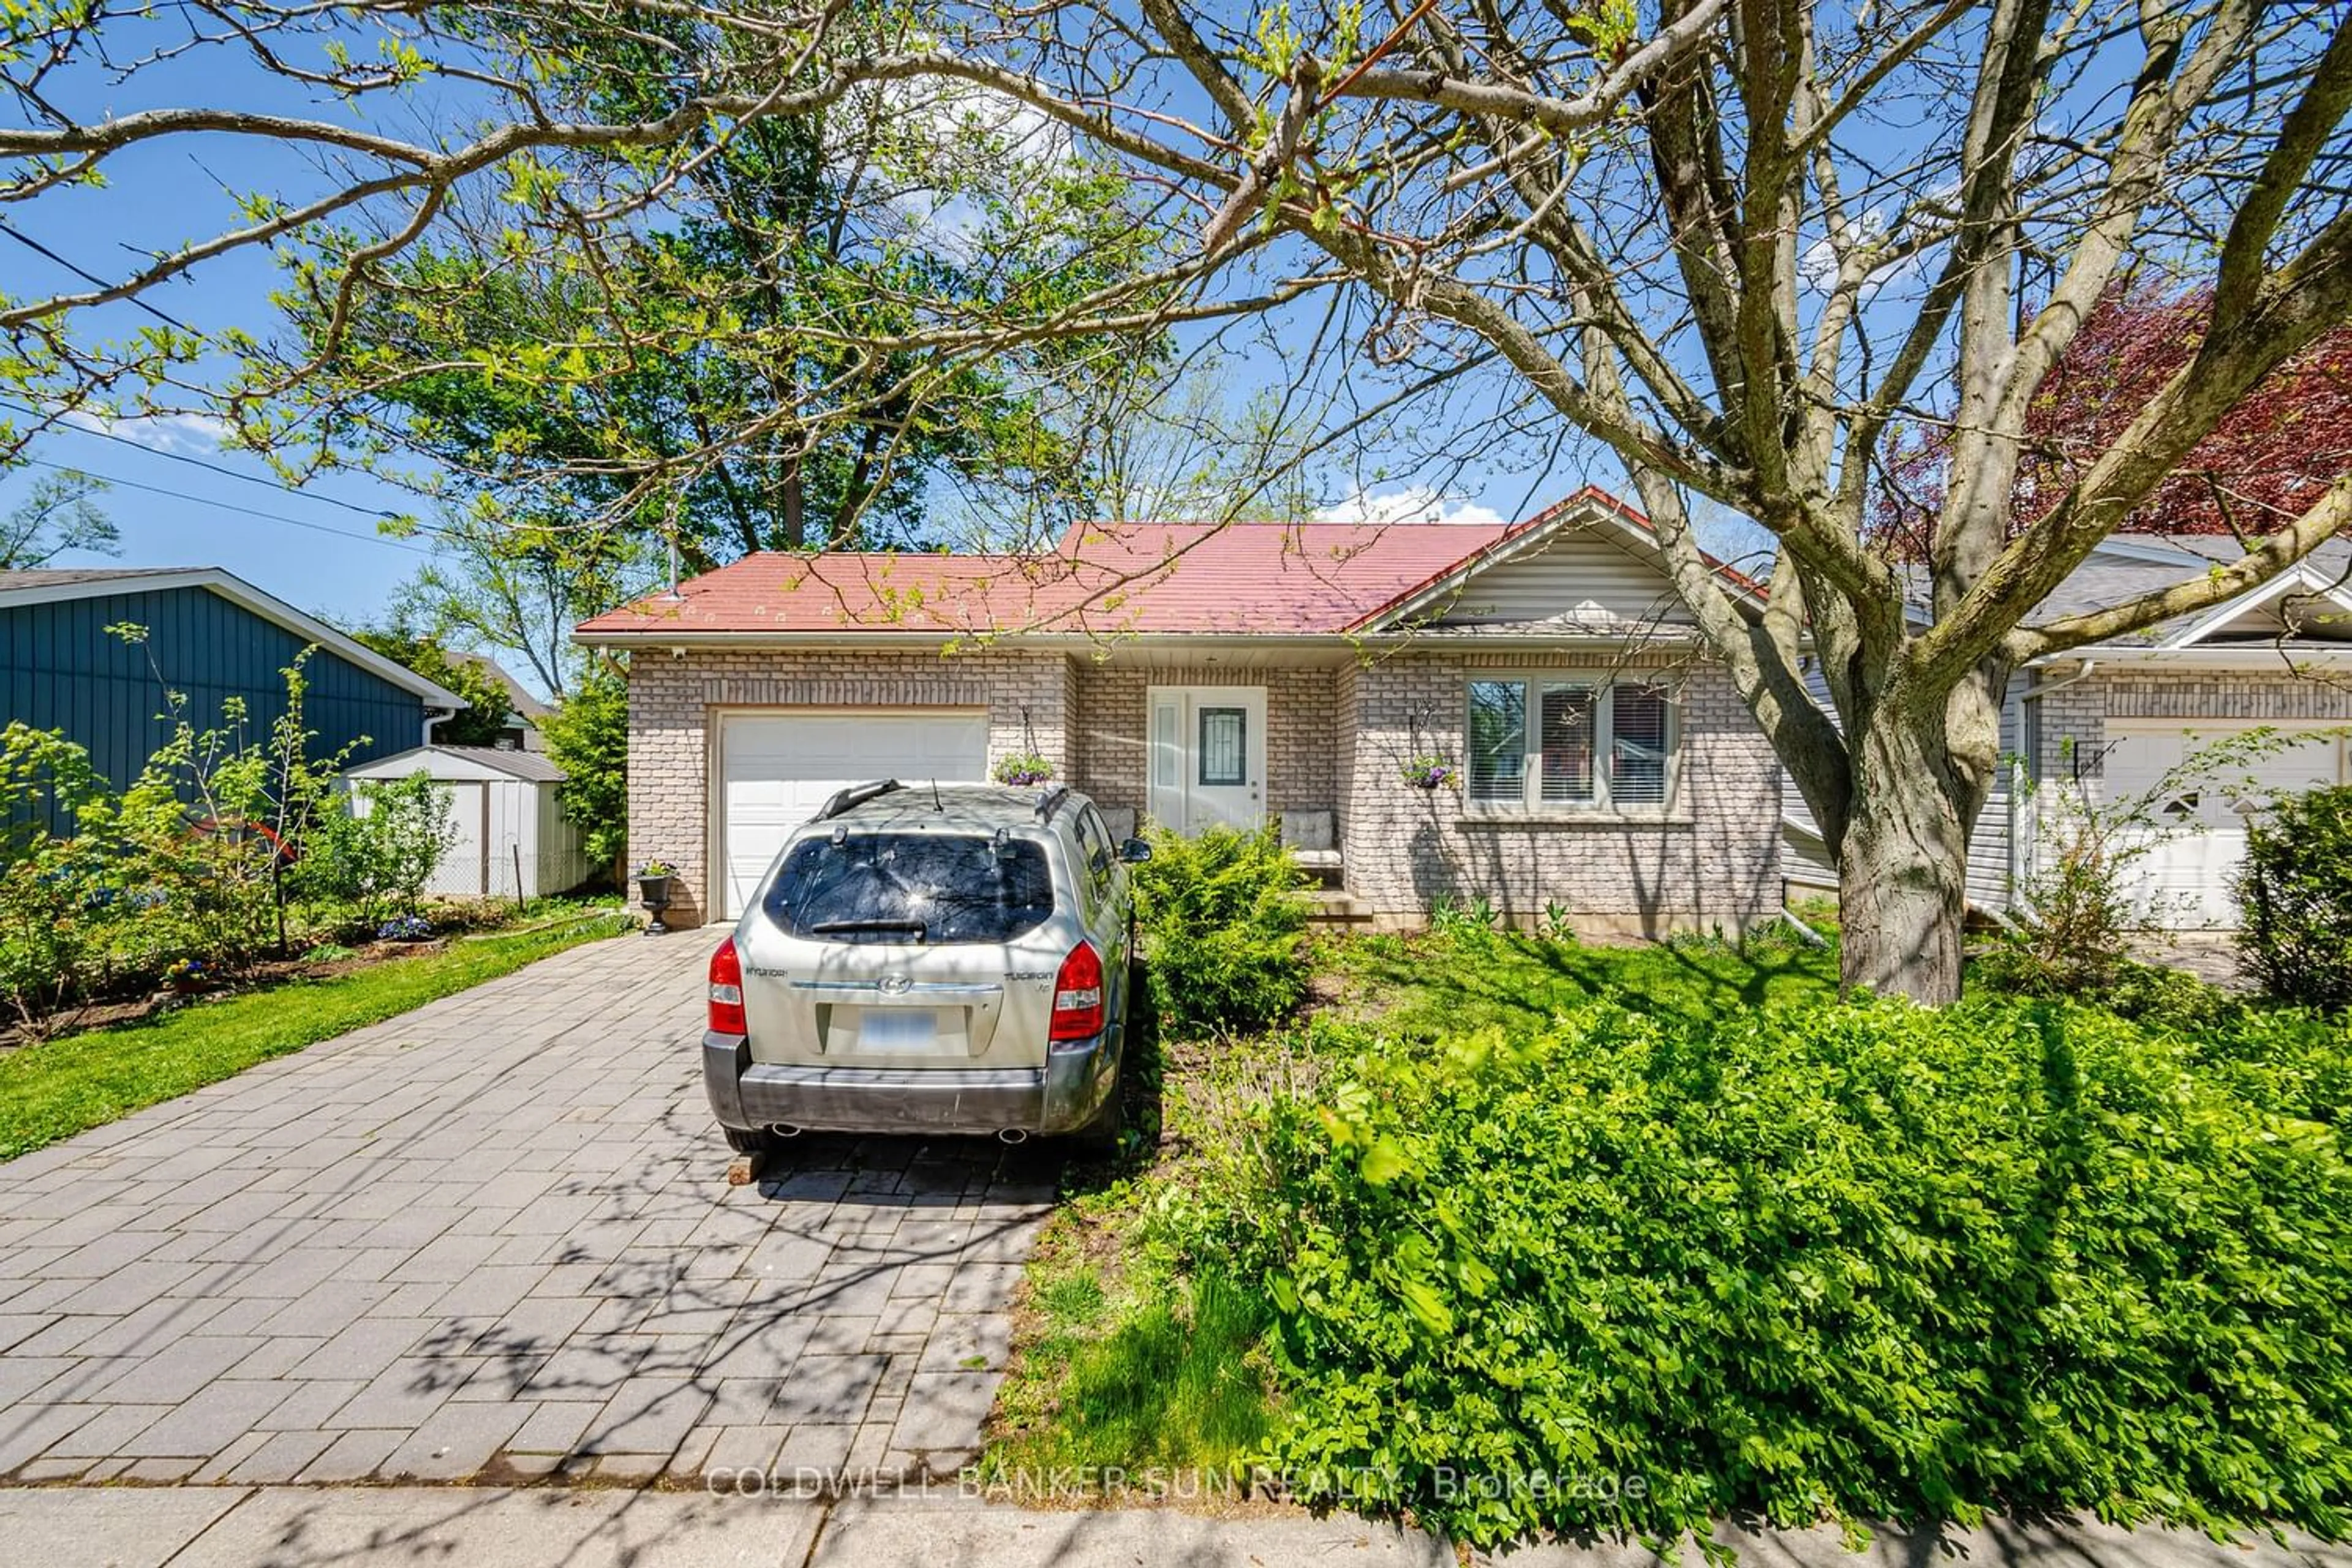 Street view for 39 Kitchener Ave, Brantford Ontario N3S 1A5